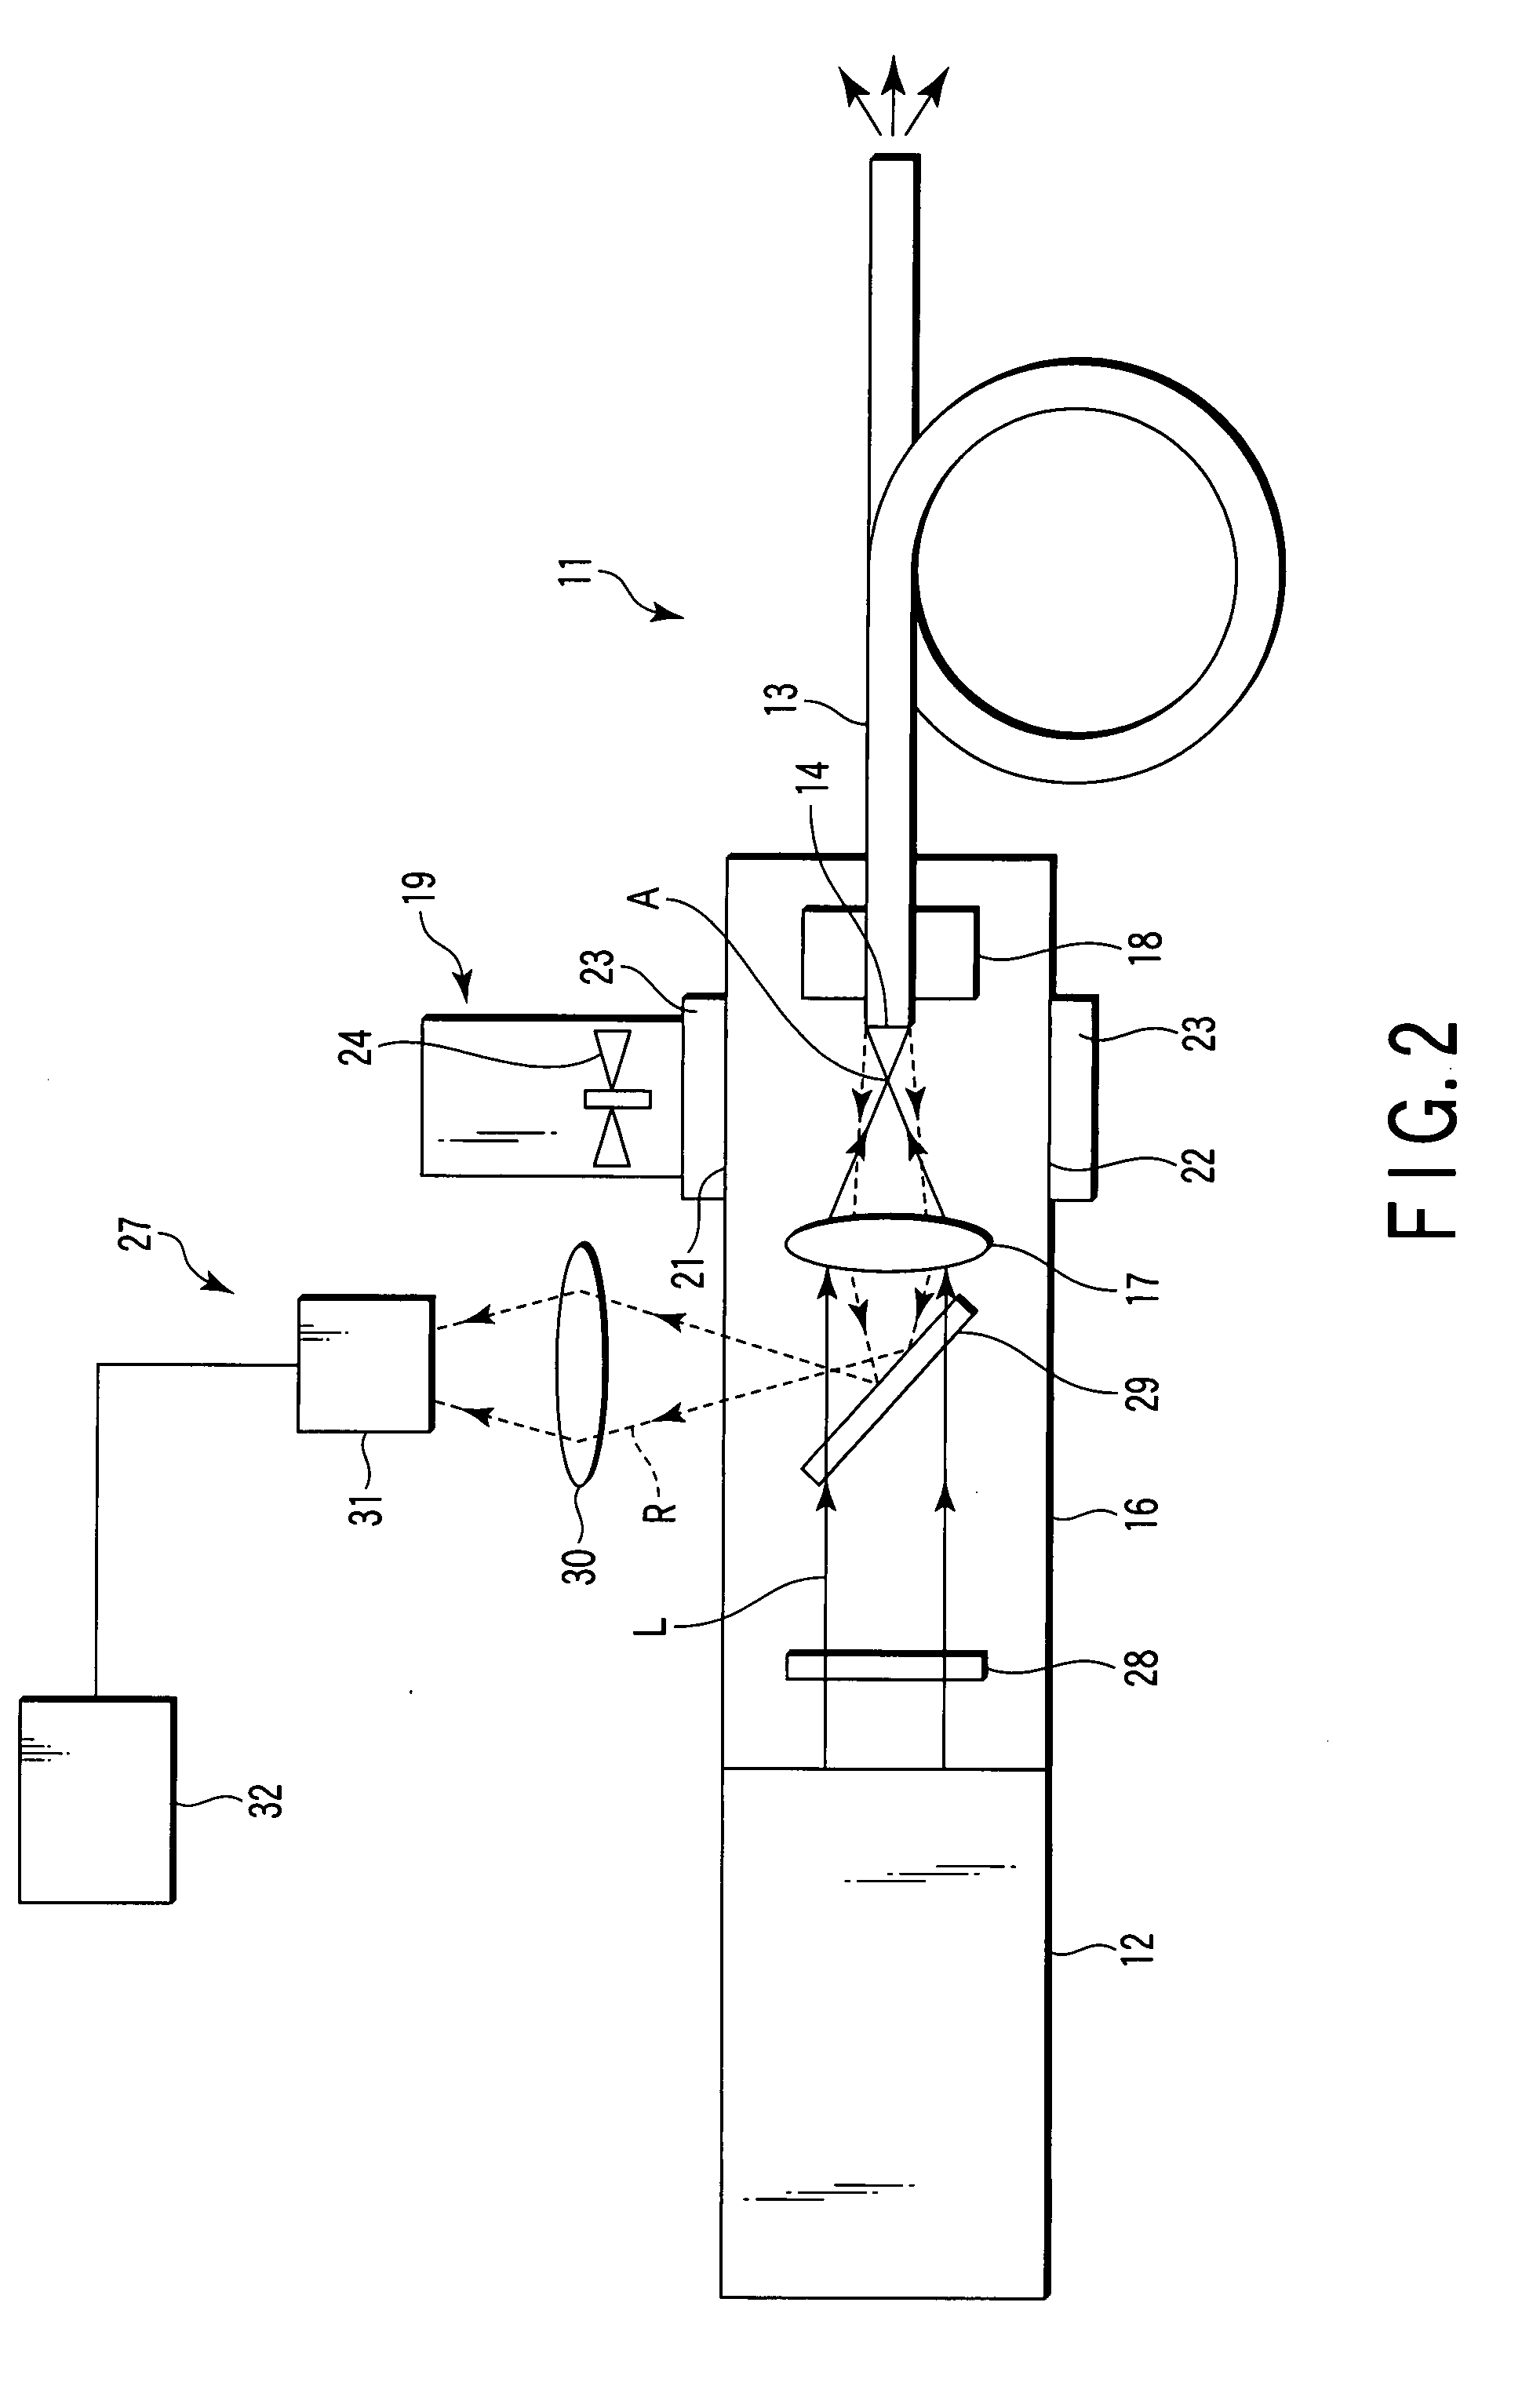 Laser beam injecting optical device for optical fiber